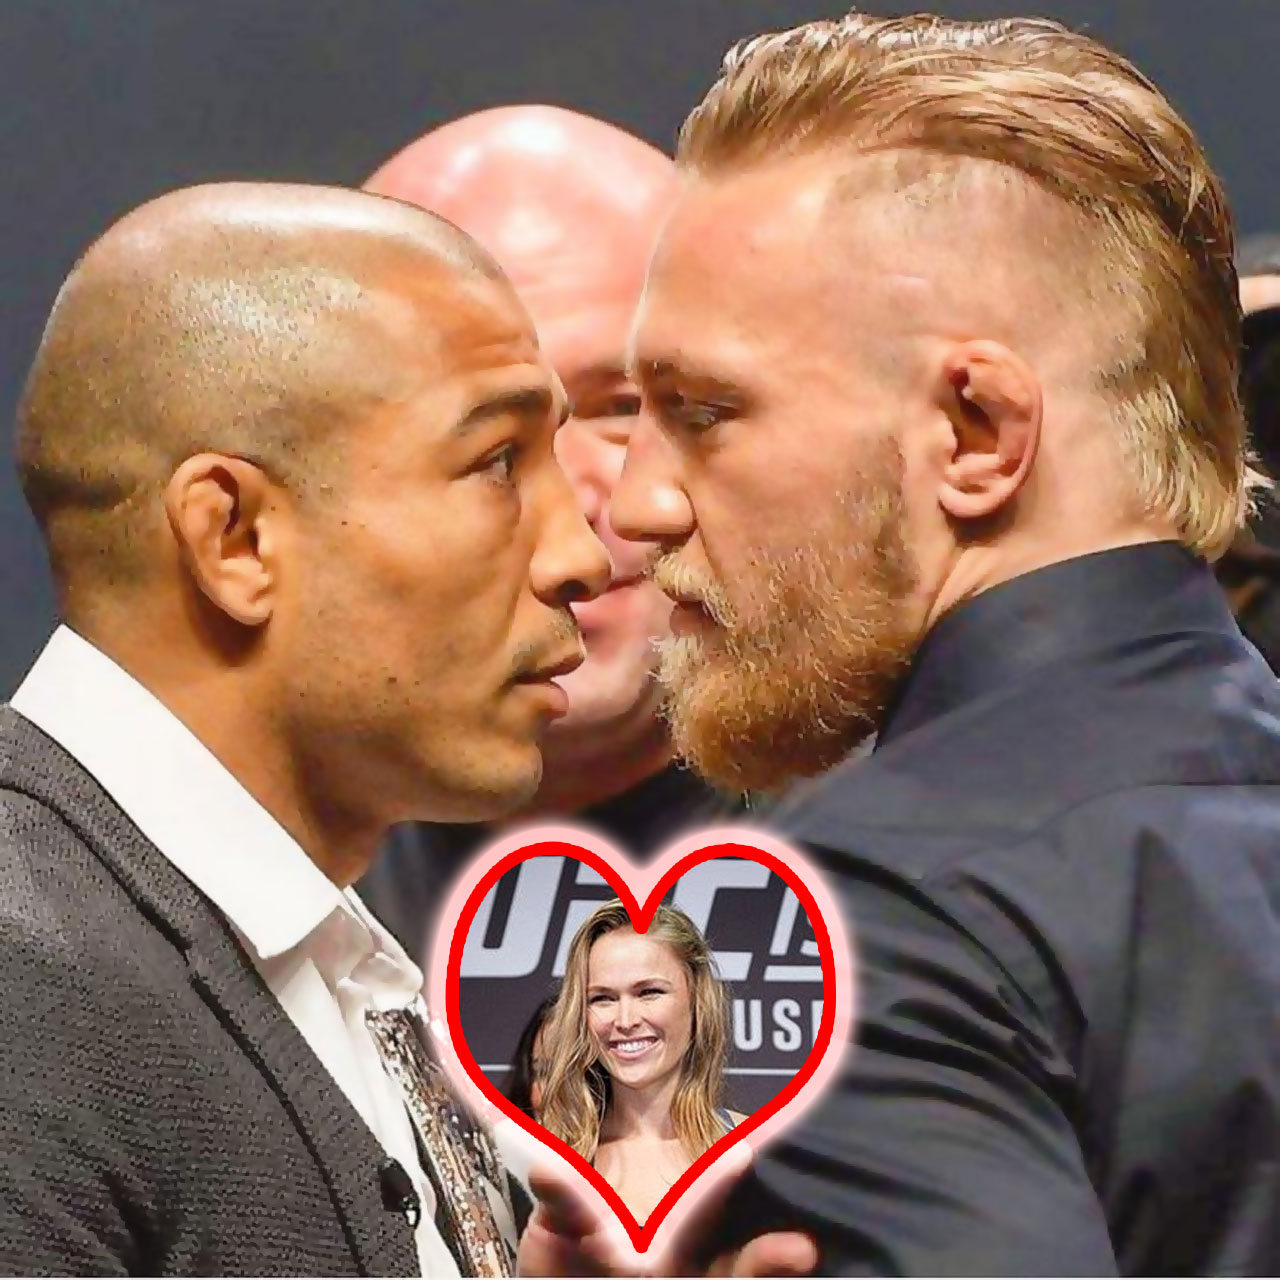 Conor McGregor and Ronda Rousey know how to make headlines for UFC